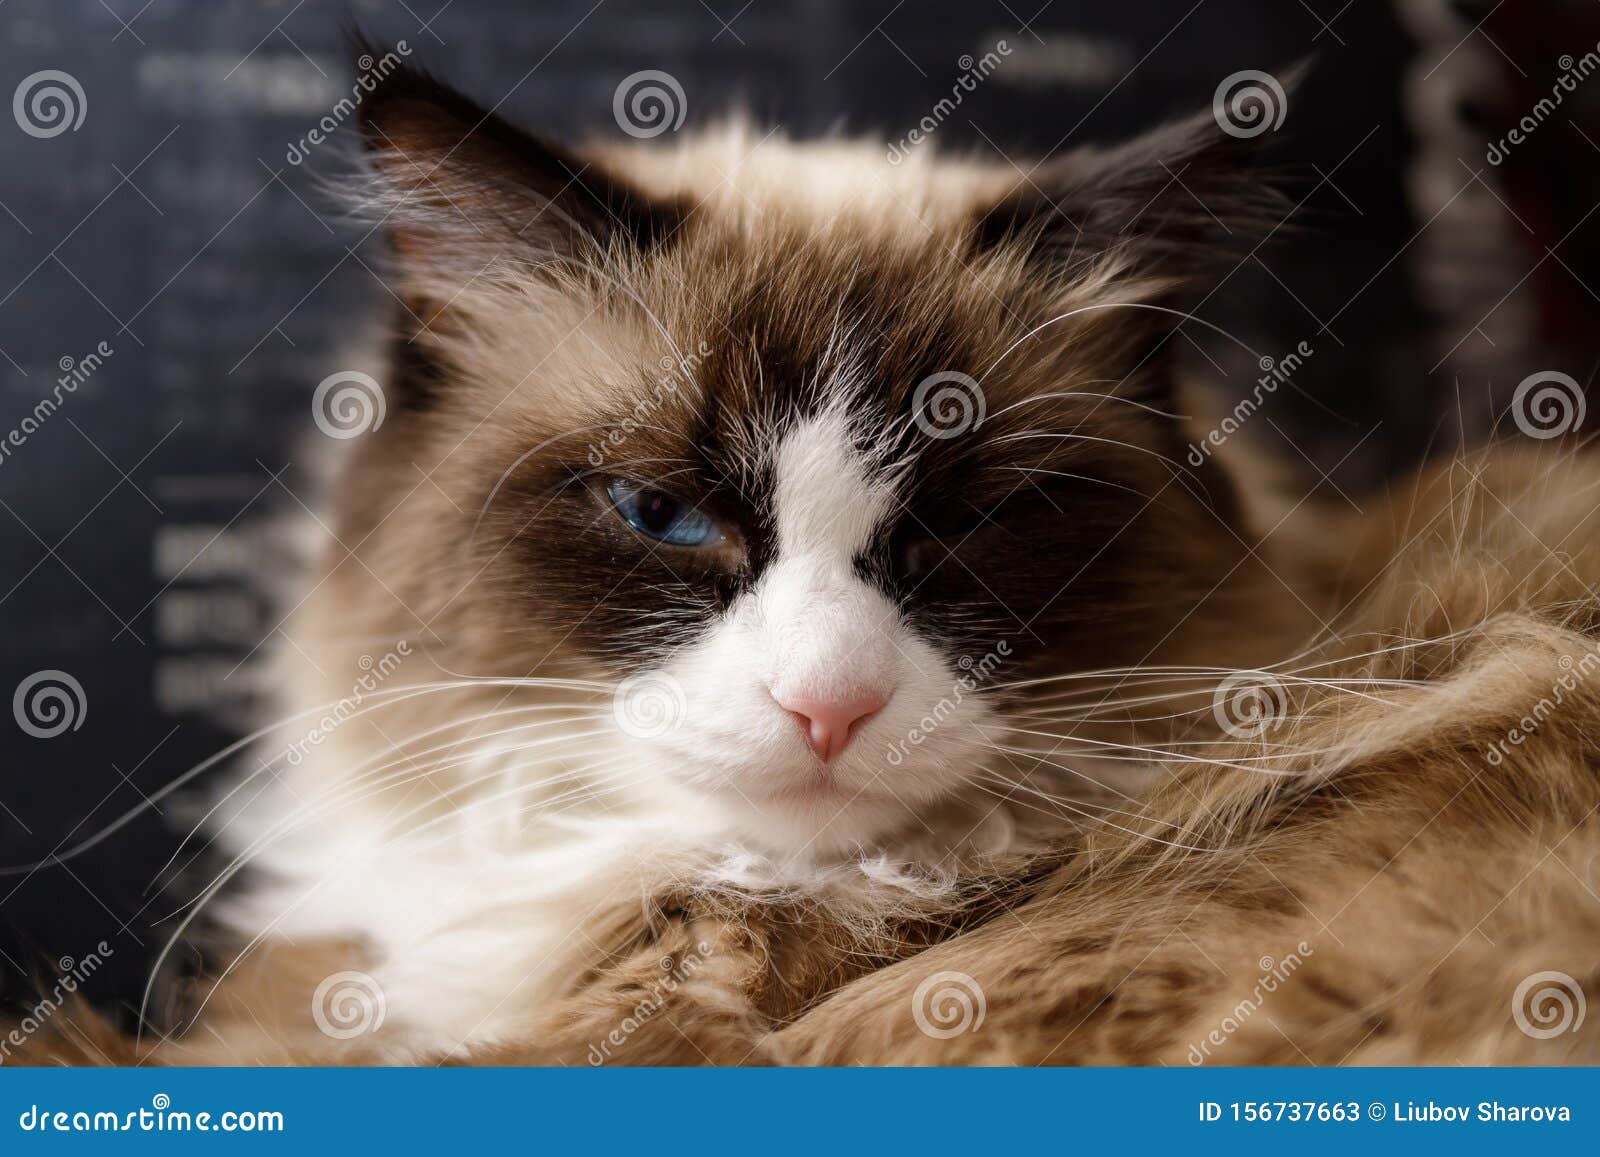 A Beautiful Neva Masquerade Cat It Is A Subspecies Of The Siberian Cat Stock Image Image Of Comfort Masquerade 156737663